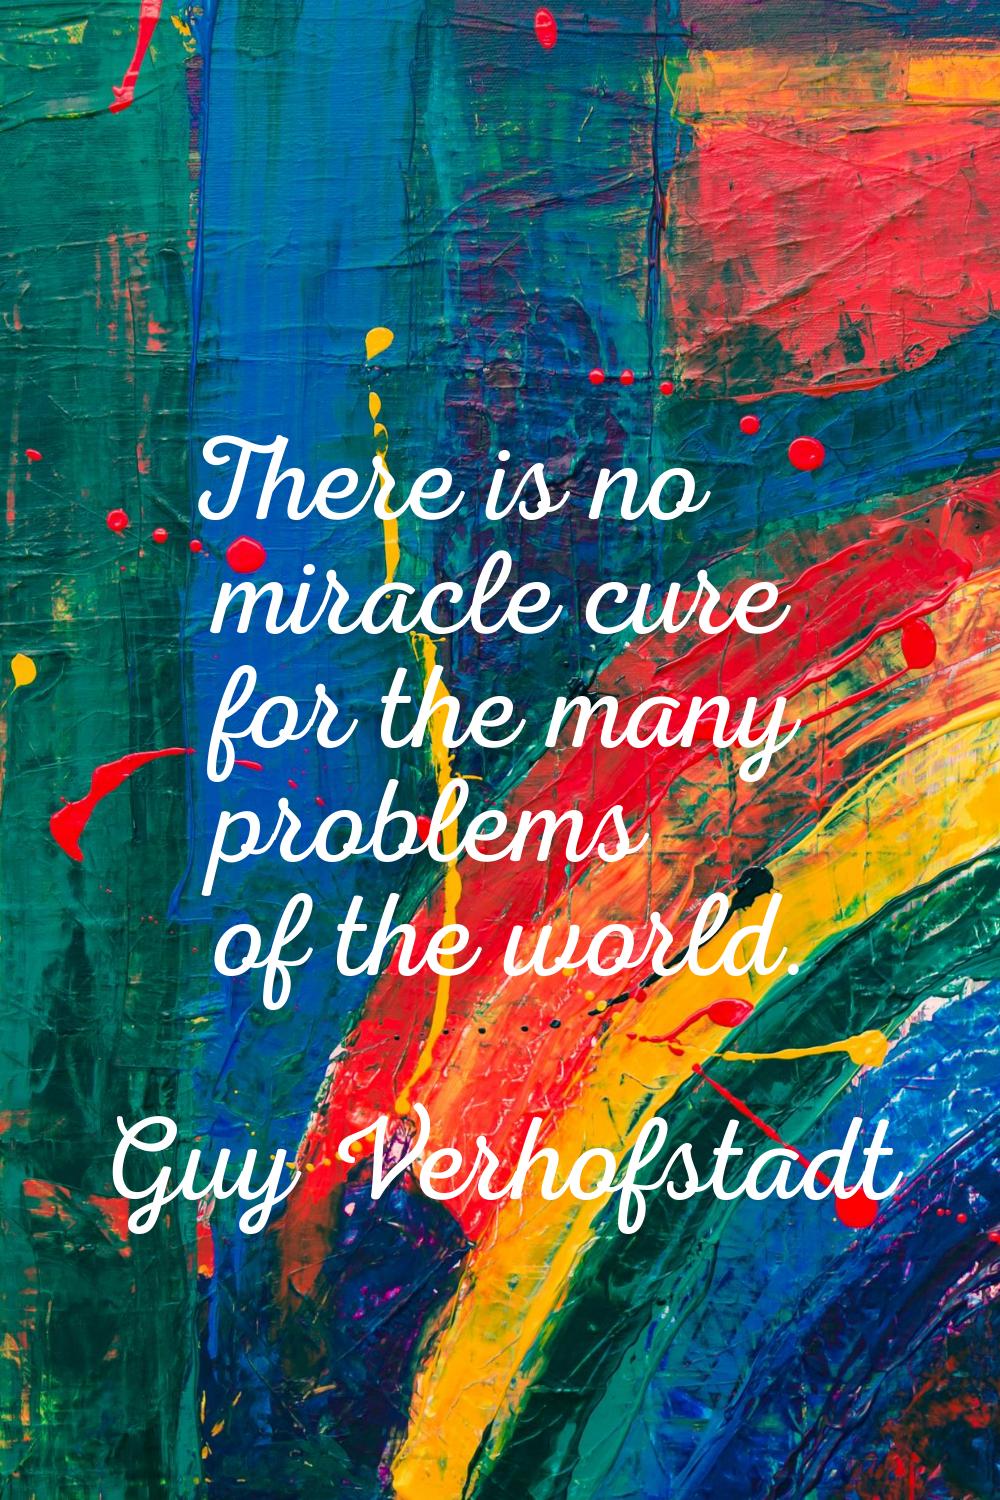 There is no miracle cure for the many problems of the world.